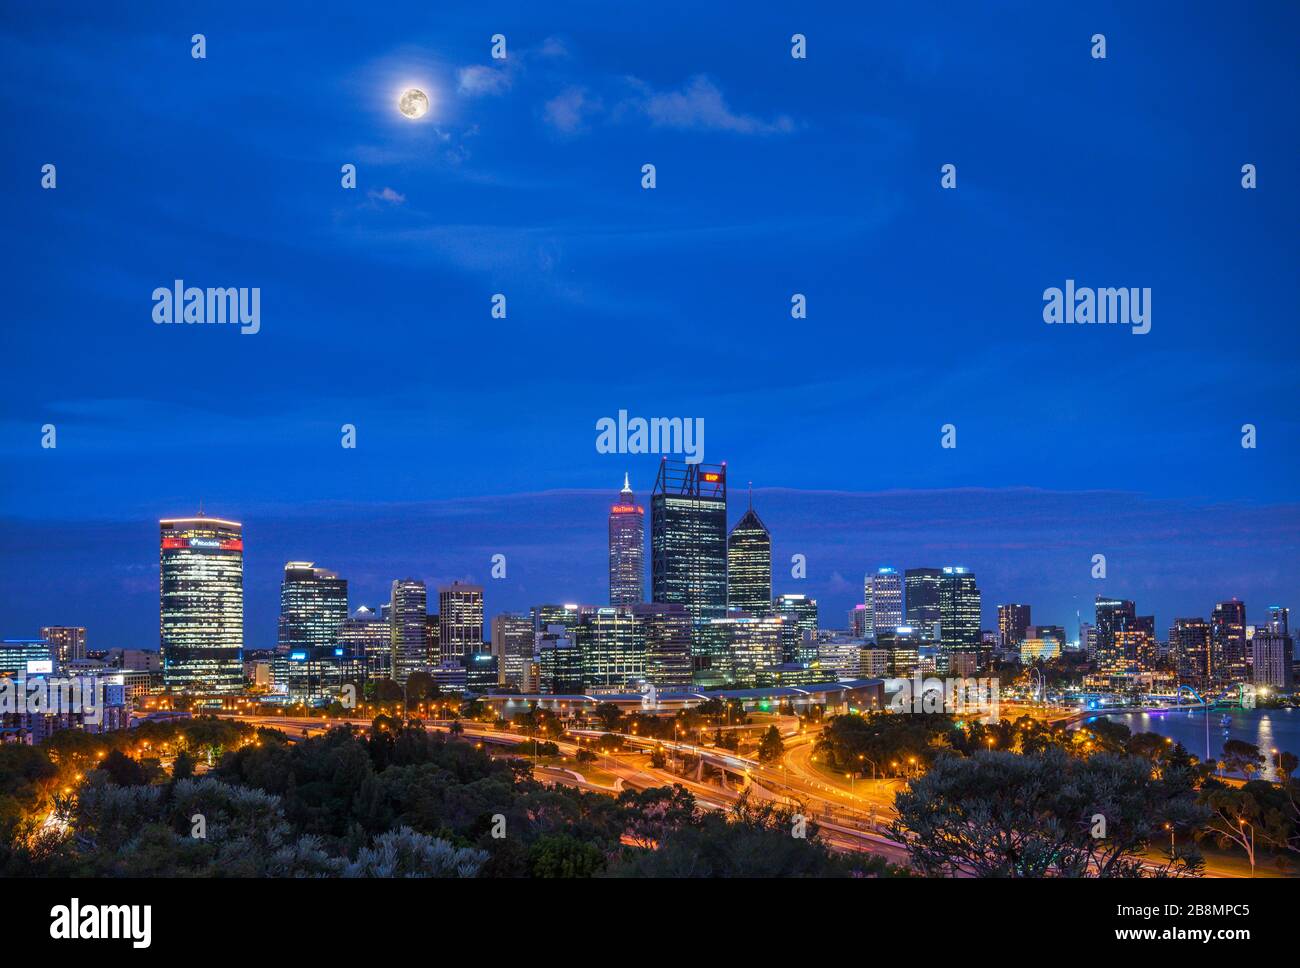 View of the Central Business District skyline at night from King's Park, Perth, Western Australia, Australia Stock Photo